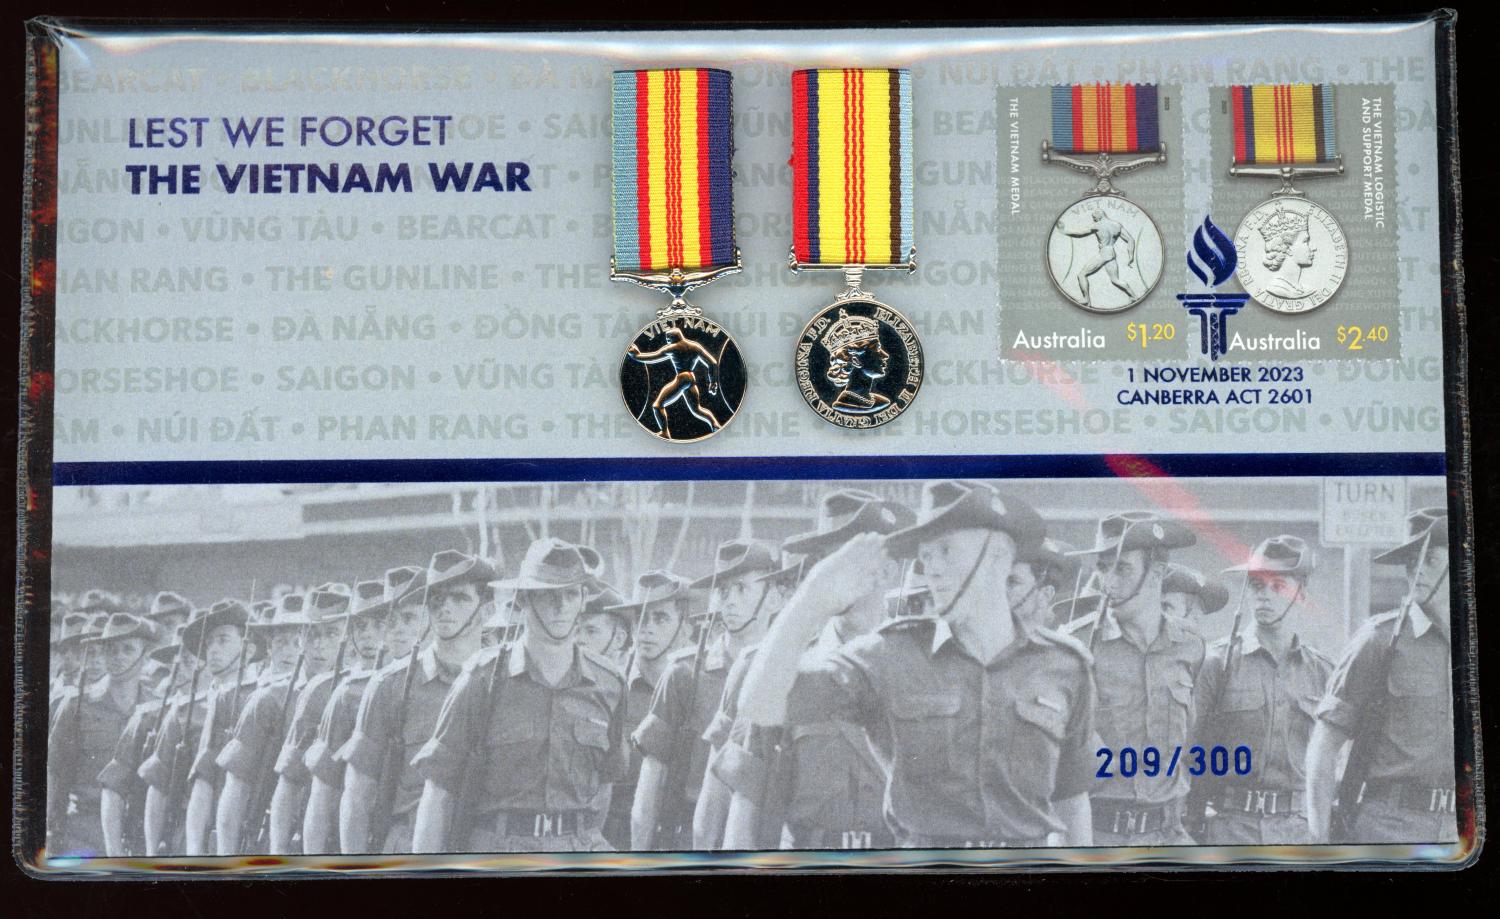 Thumbnail for 2023 Lest We Forget The Vietnam War - Mini Replica Medal Prestige Cover - Impressions Release 209-300